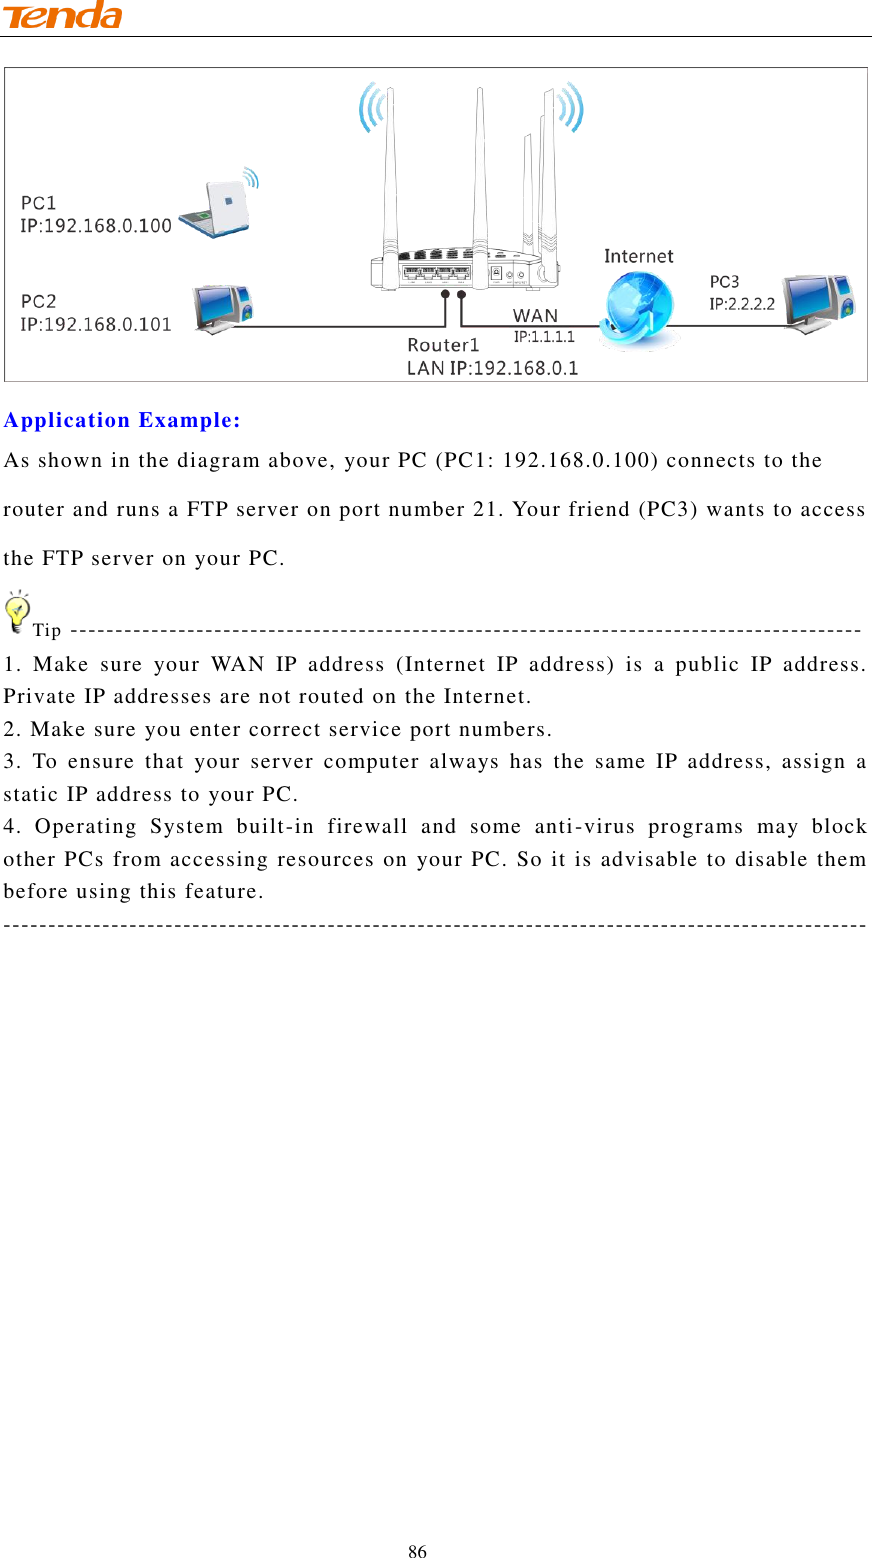                                    86  Application Example: As shown in the diagram above, your PC (PC1: 192.168.0.100) connects to the router and runs a FTP server on port number 21. Your friend (PC3) wants to access the FTP server on your PC. Tip ---------------------------------------------------------------------------------------- 1.  Make  sure  your  WAN  IP  address  (Internet  IP  address)  is  a  public  IP  address. Private IP addresses are not routed on the Internet. 2. Make sure you enter correct service port numbers. 3.  To  ensure  that  your  server  computer  always  has  the  same  IP  address,  assign  a  static IP address to your PC. 4.  Operating  System  built-in  firewall  and  some  anti-virus  programs  may  block other PCs from accessing resources on your PC. So it is advisable to disable them before using this feature. ------------------------------------------------------------------------------------------------  